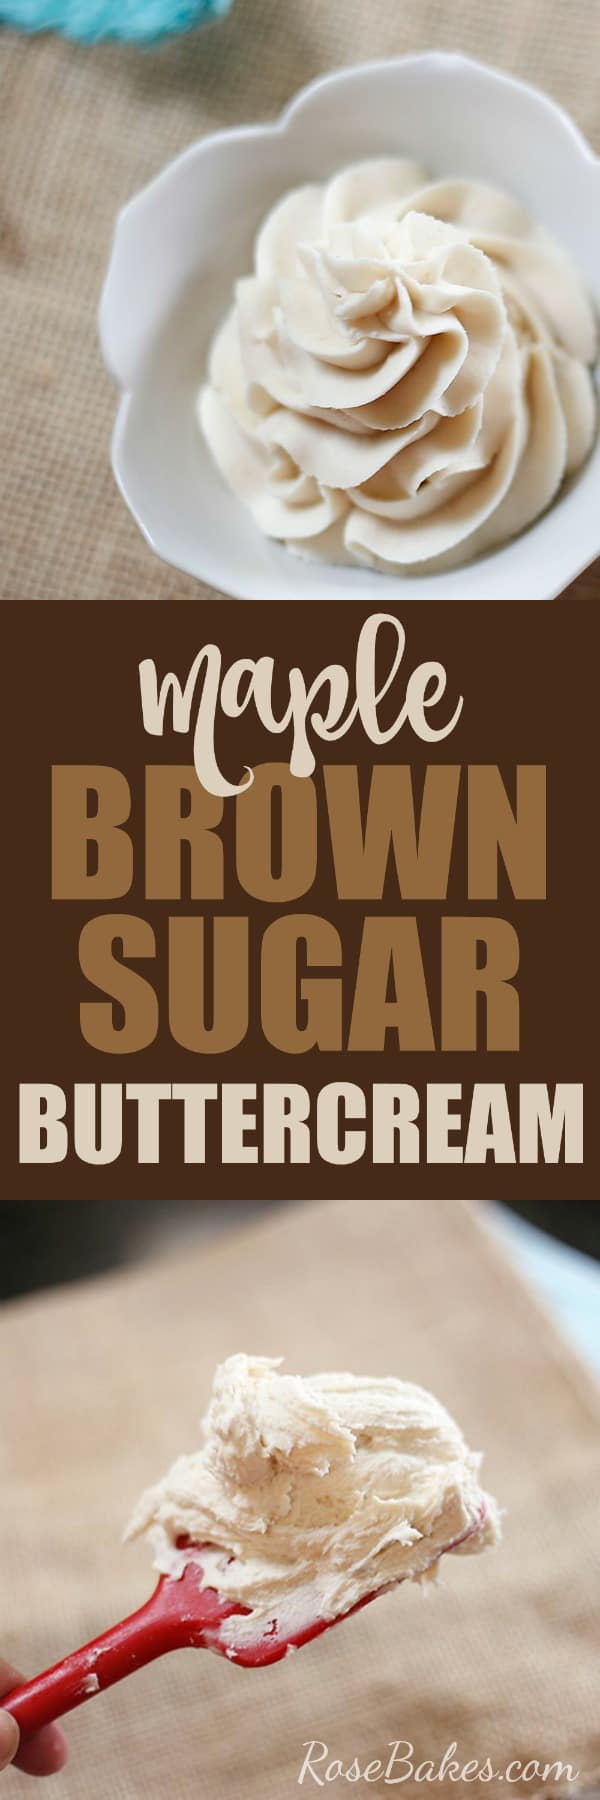 Top image is a white bowl with a piped swirl of maple brown sugar buttercream. Bottom image is a red spatula with maple brown sugar buttercream on it. In between the images is the text, "maple brown sugar buttercream"